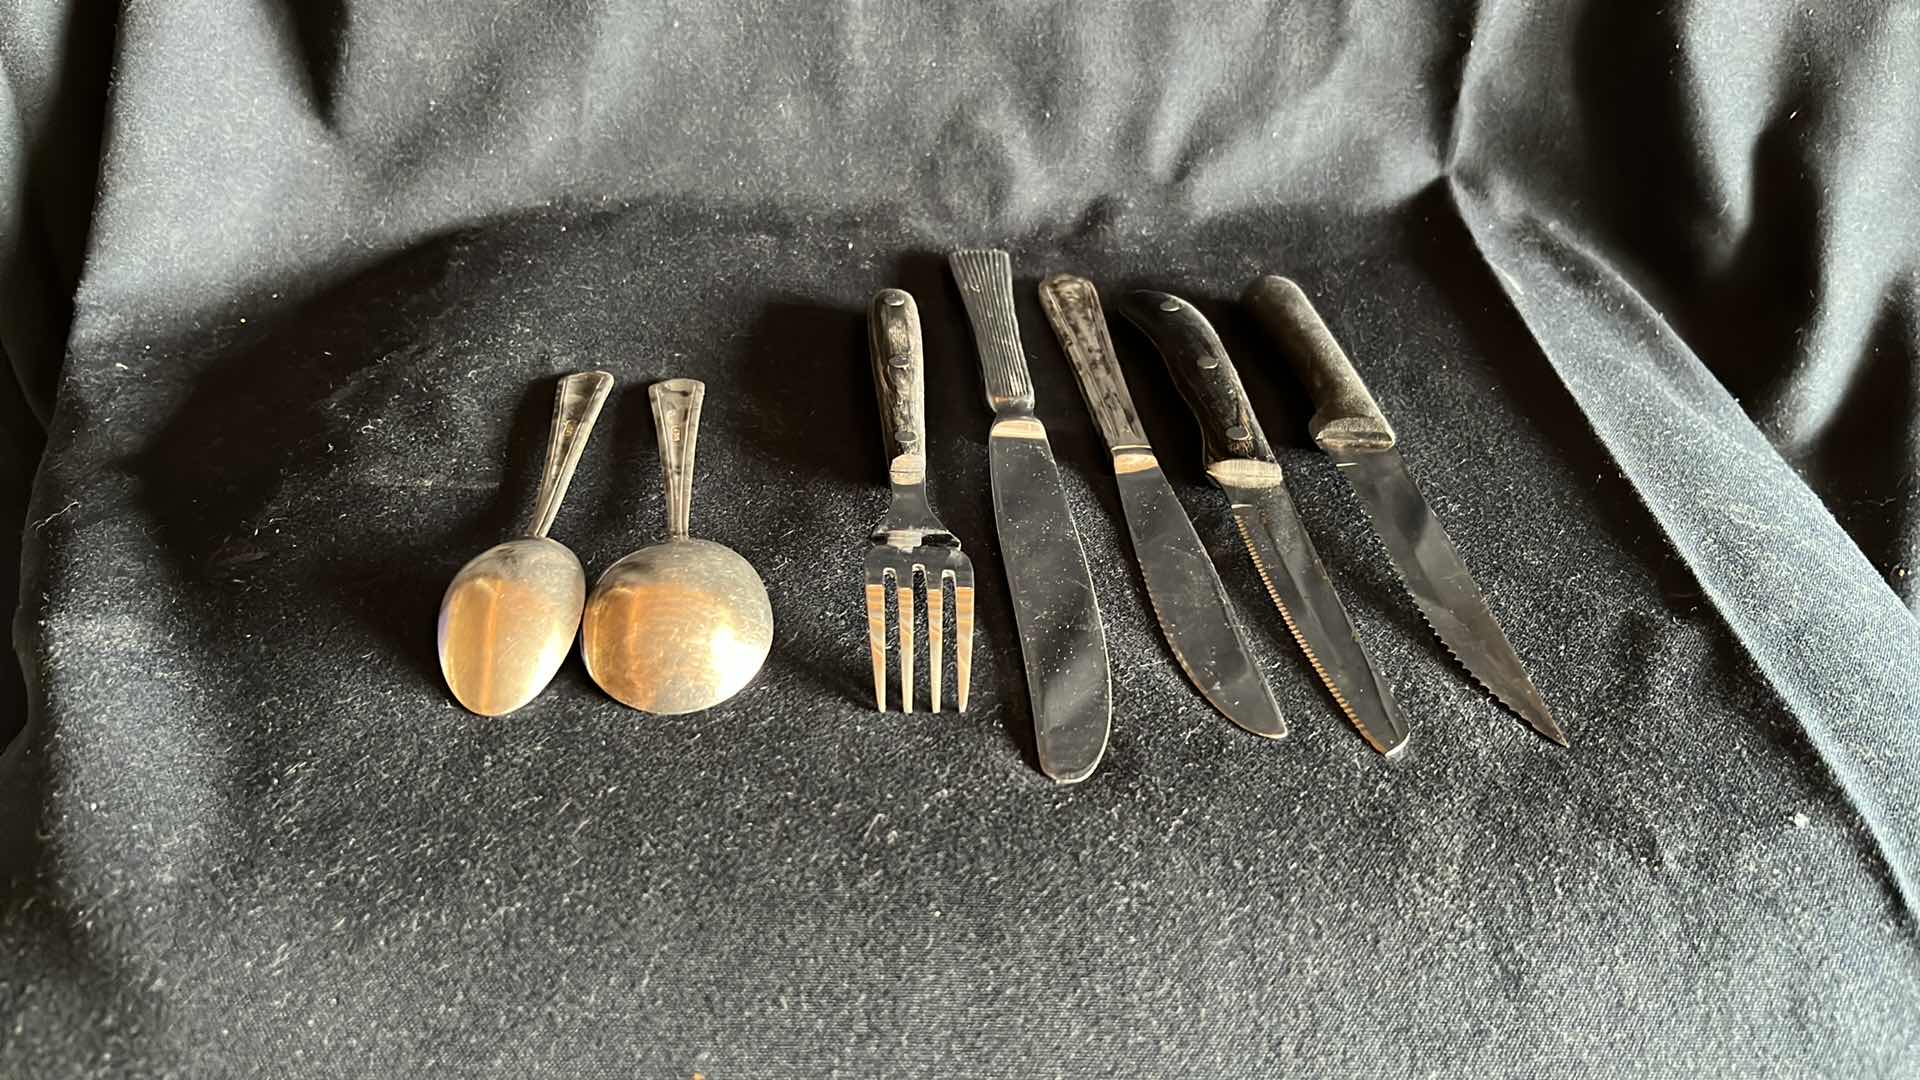 Photo 2 of FLATWARE VARIOUS STYLES SPOONS, FORKS, BUTTER KNIVES, STEAK KNIVES SETS OF 20 EACH W COMMERCIAL HALF SIZE FLATWARE RACK